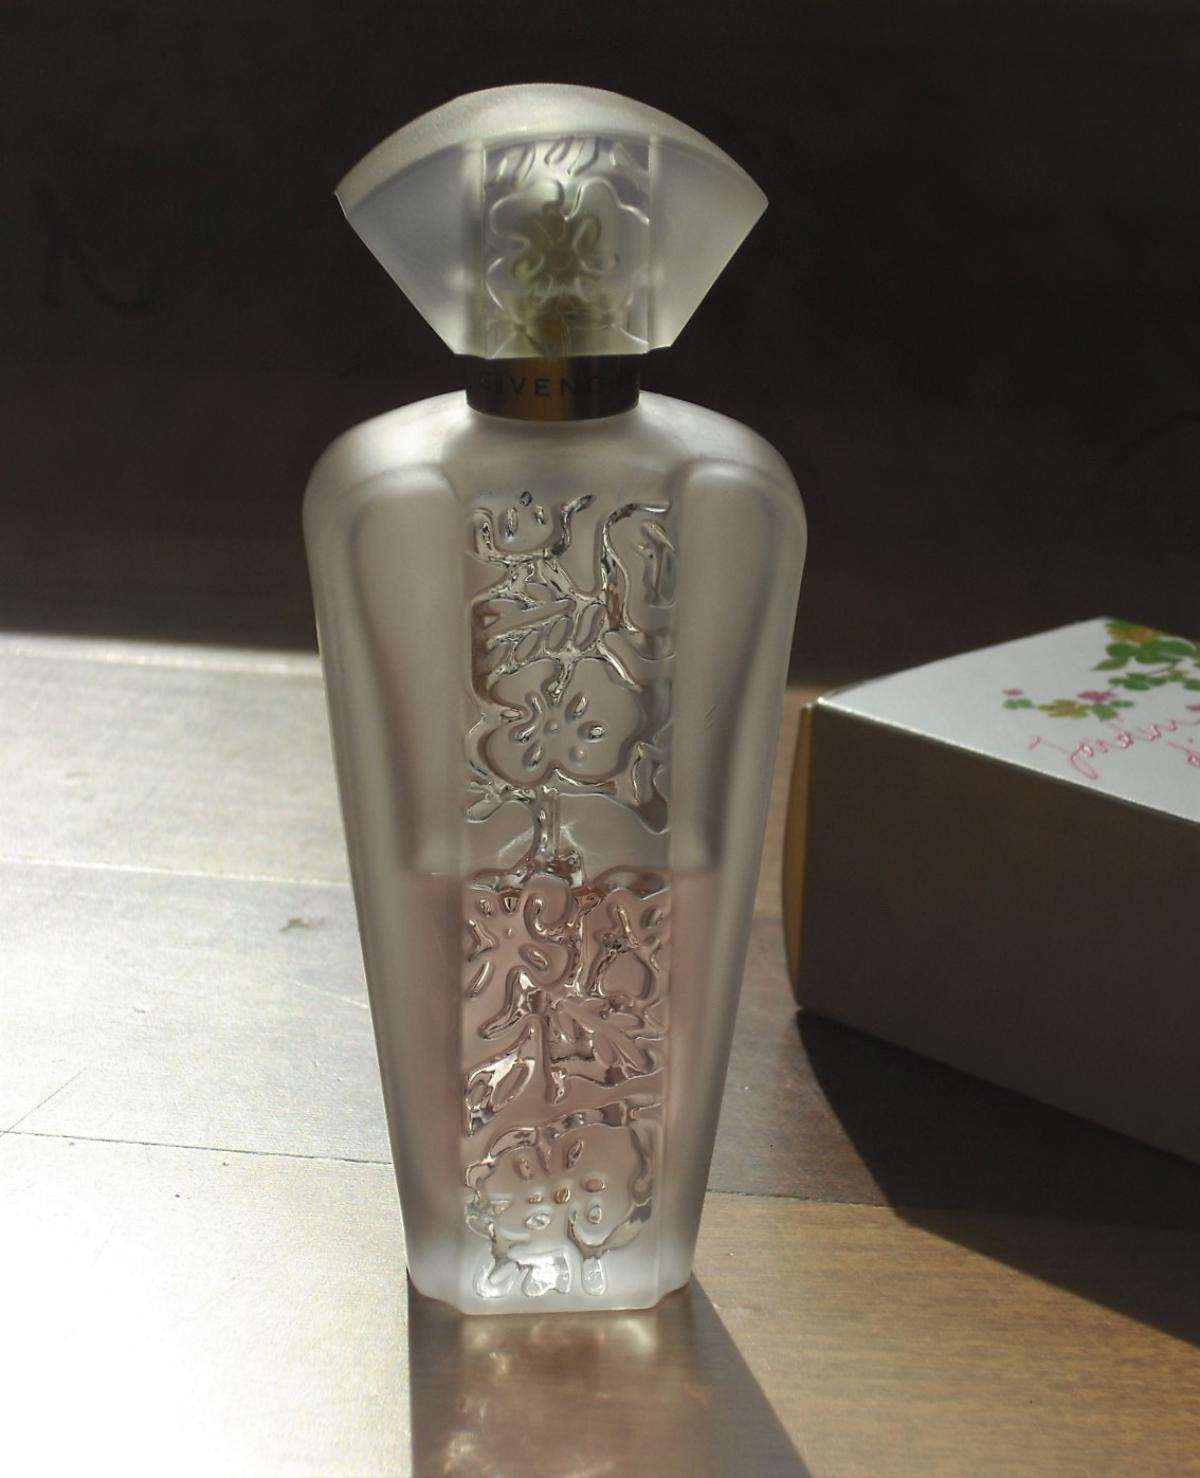 Jardin d'Interdit Givenchy perfume - a fragrance for women 2006